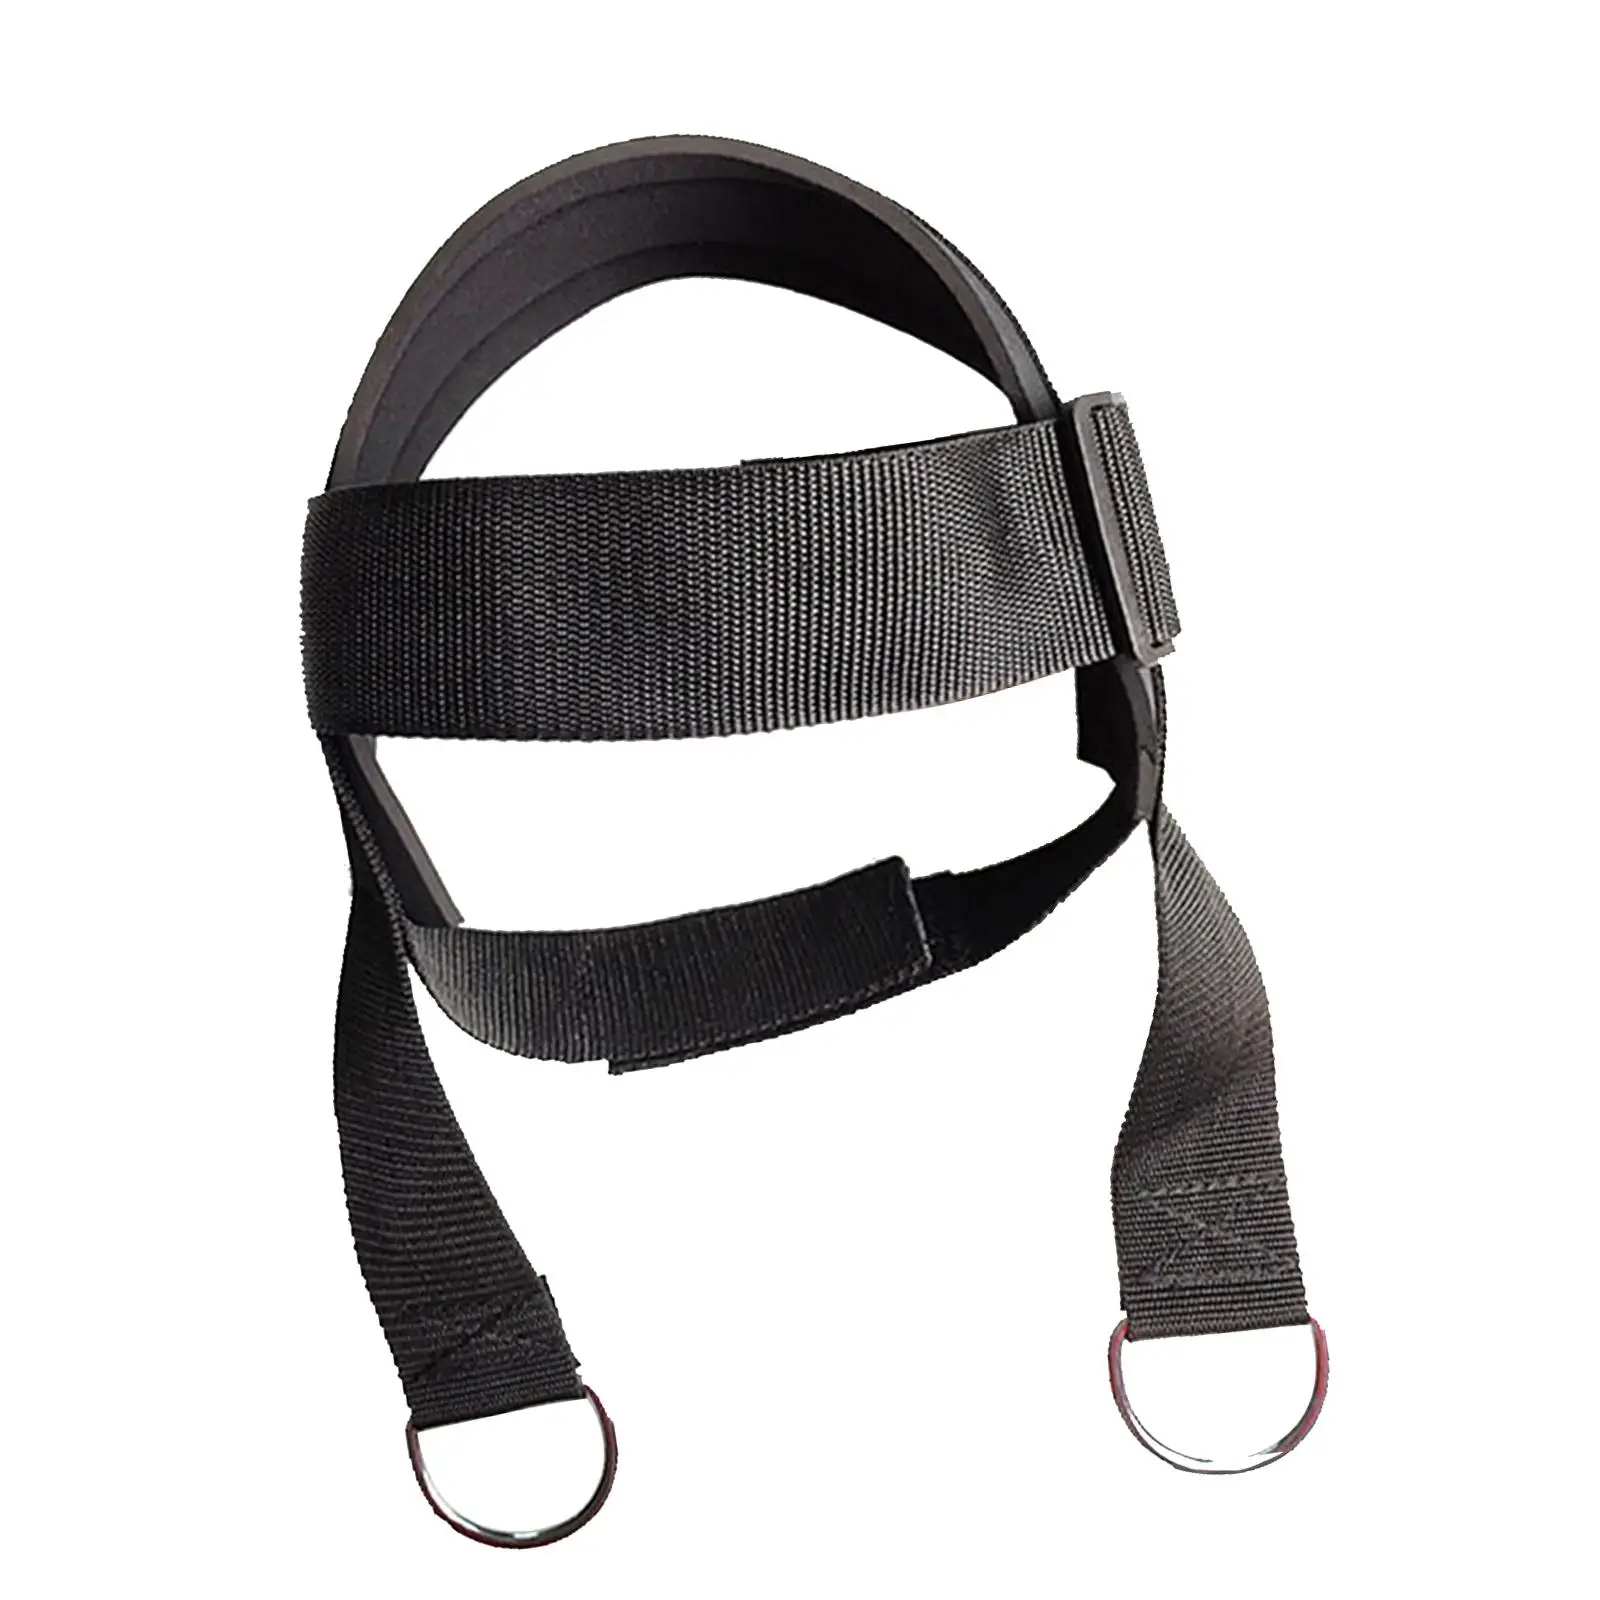 Weight Lifting Wrestling with Metal Loop Equipment Home Head Neck Harness